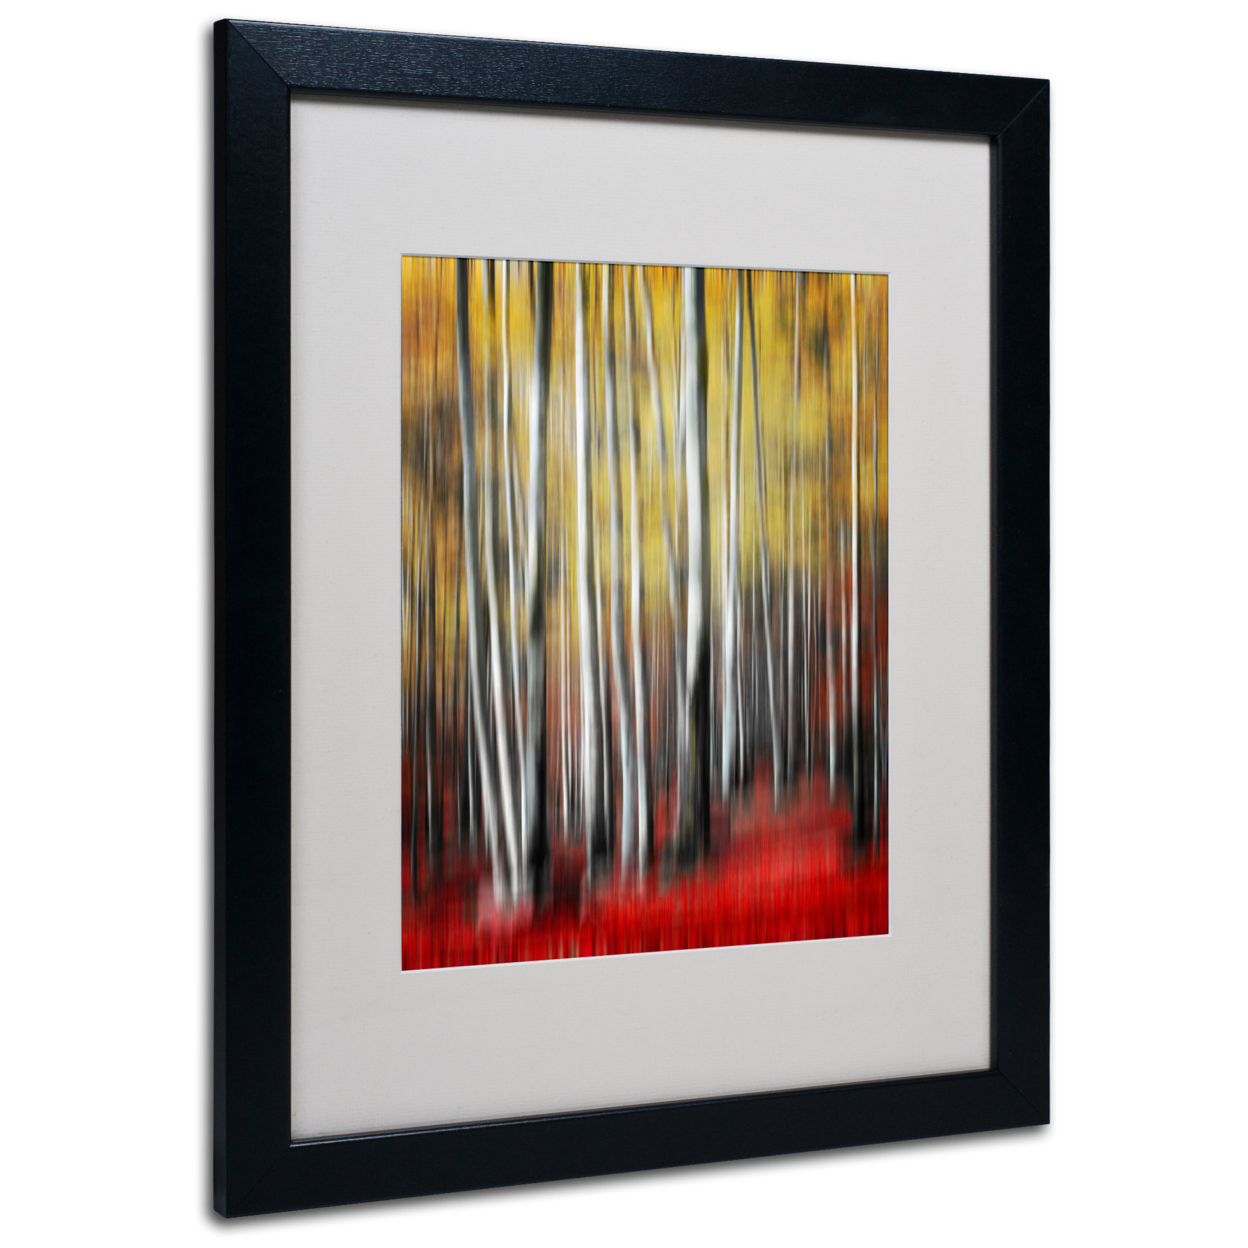 Philippe Sainte-Laudy 'Osmosis' Black Wooden Framed Art 18 X 22 Inches